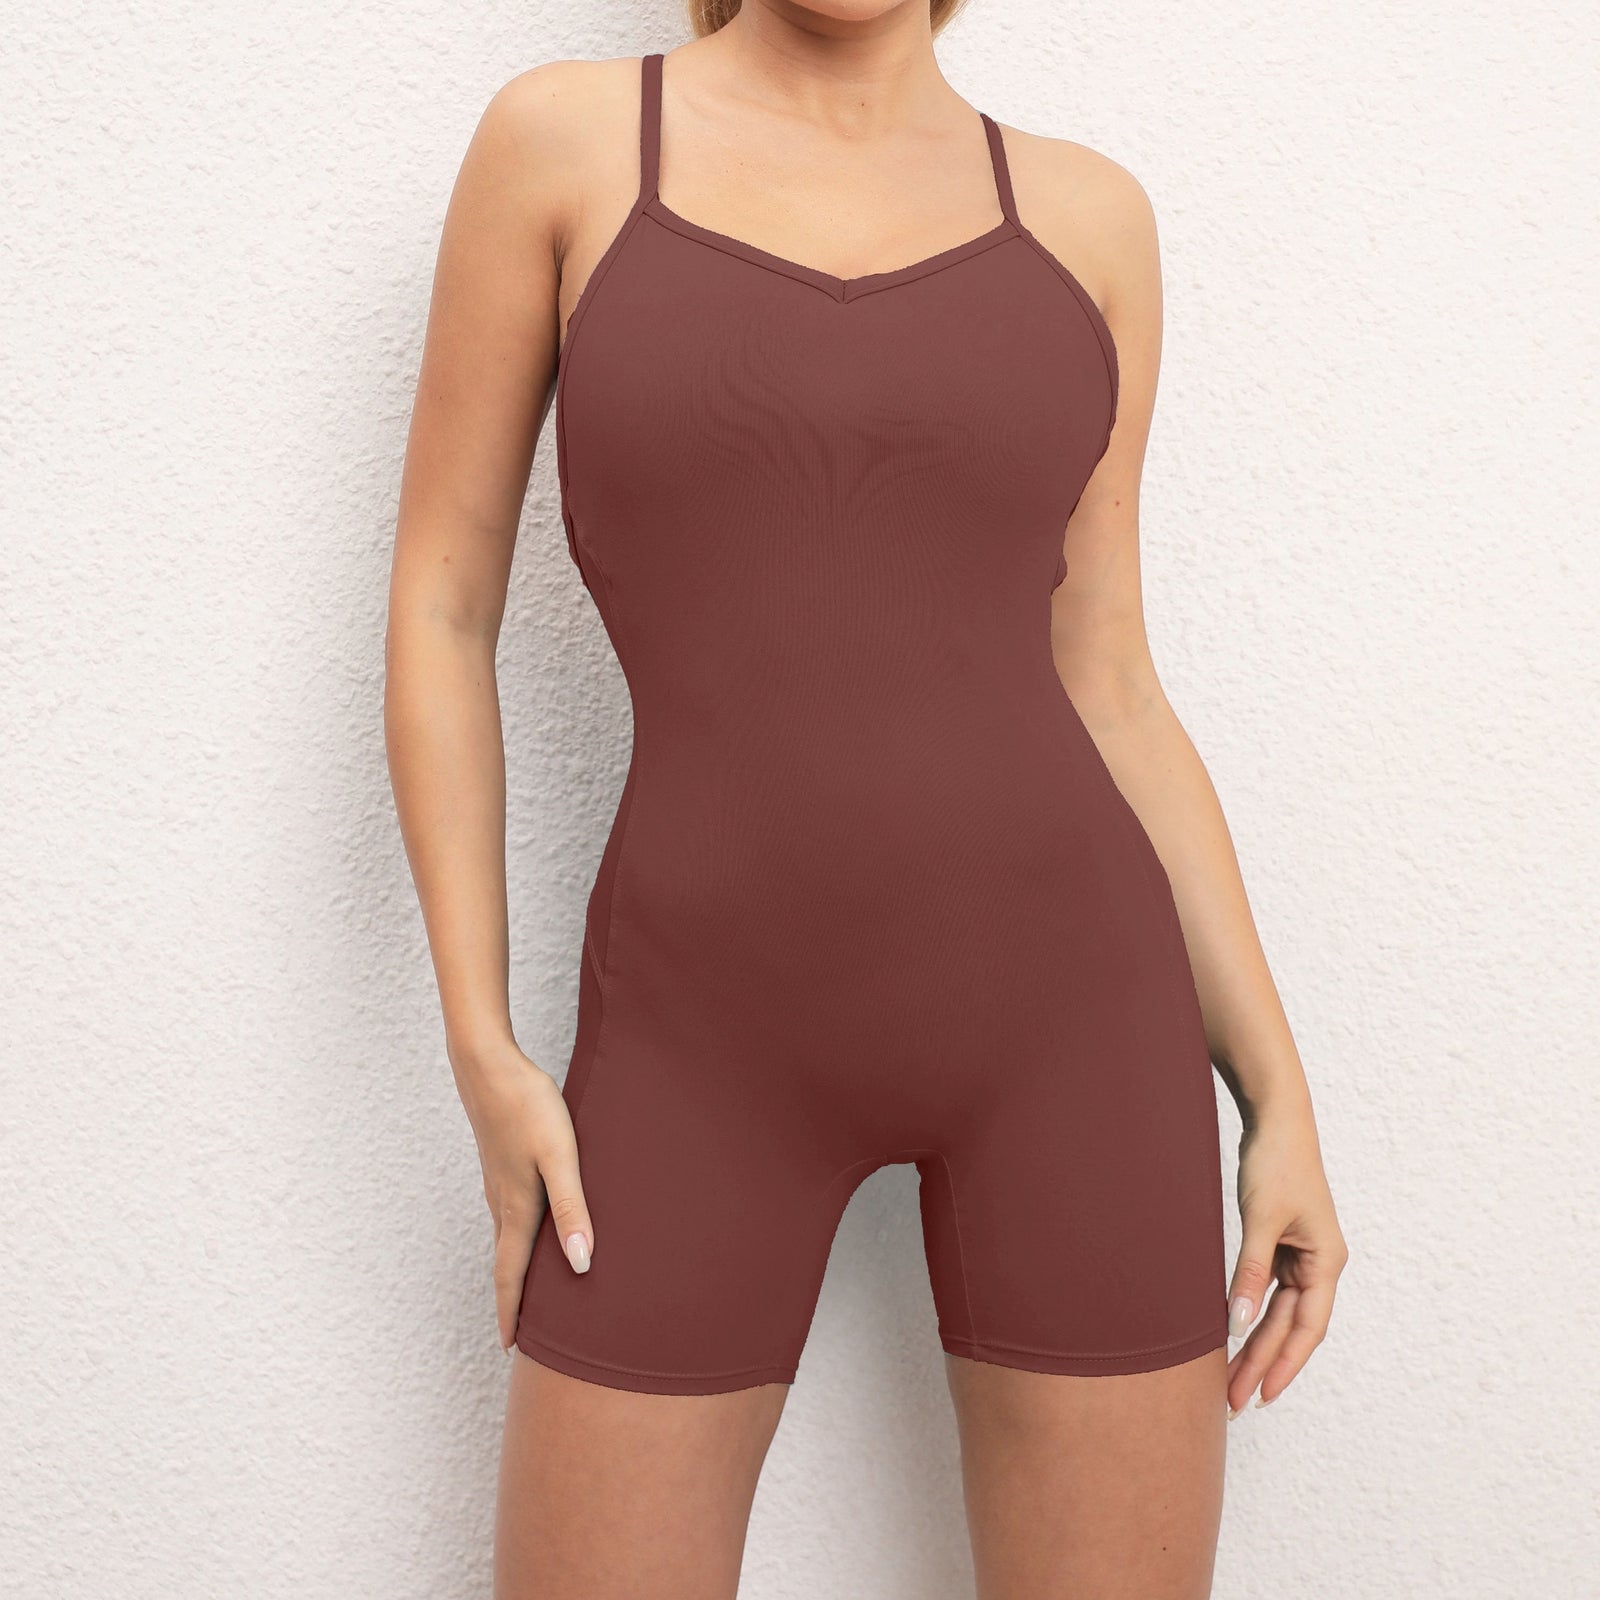 Yoga Set One Piece Seamless Playsuit Sportswear Yoga Jumpsuit Backless Sexy Suit Tights Women Sport Shorts Fitness Outfits Gym